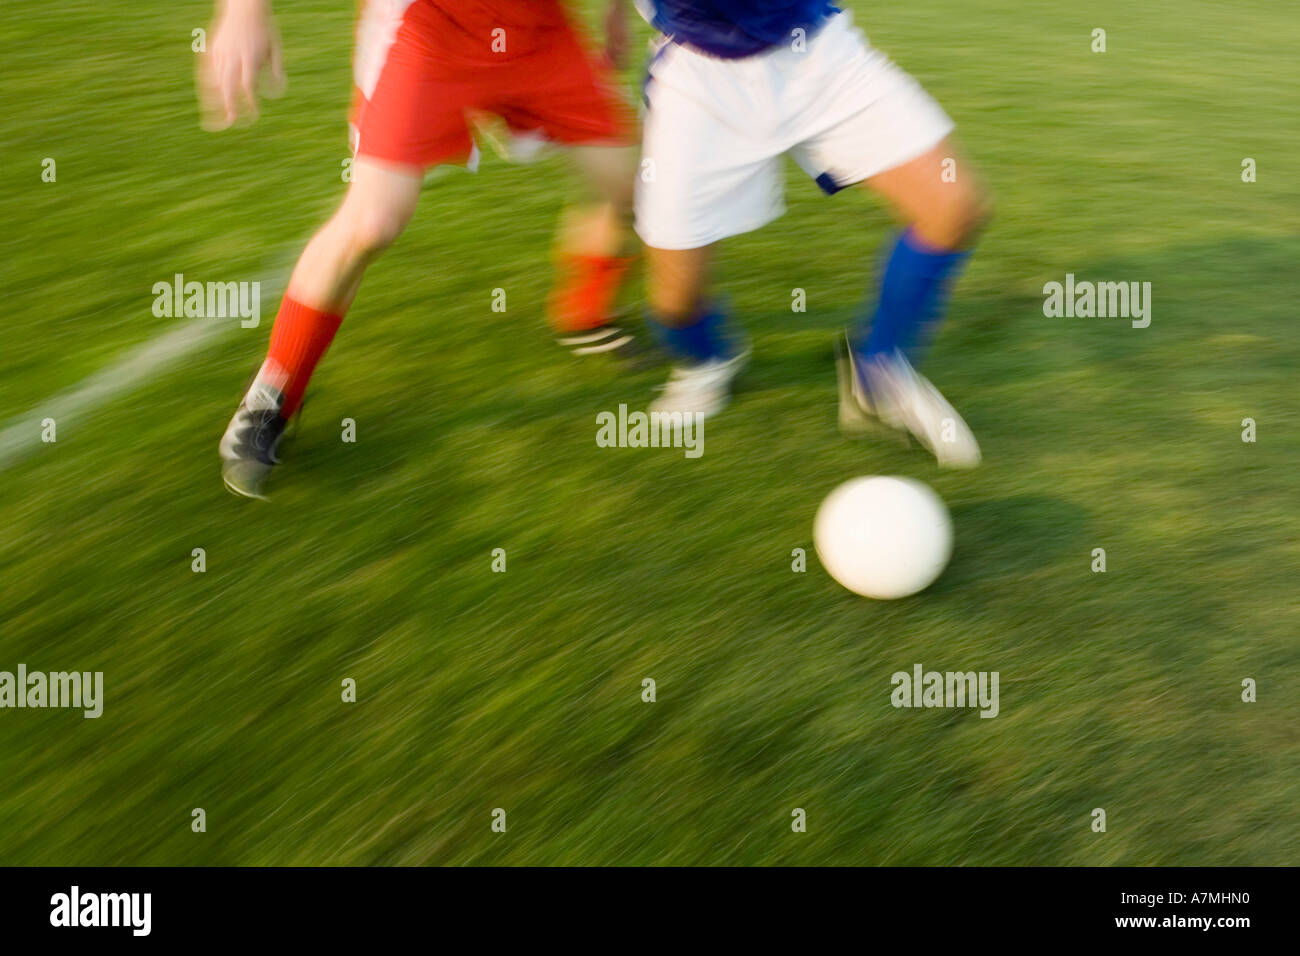 Two people playing soccer Stock Photo